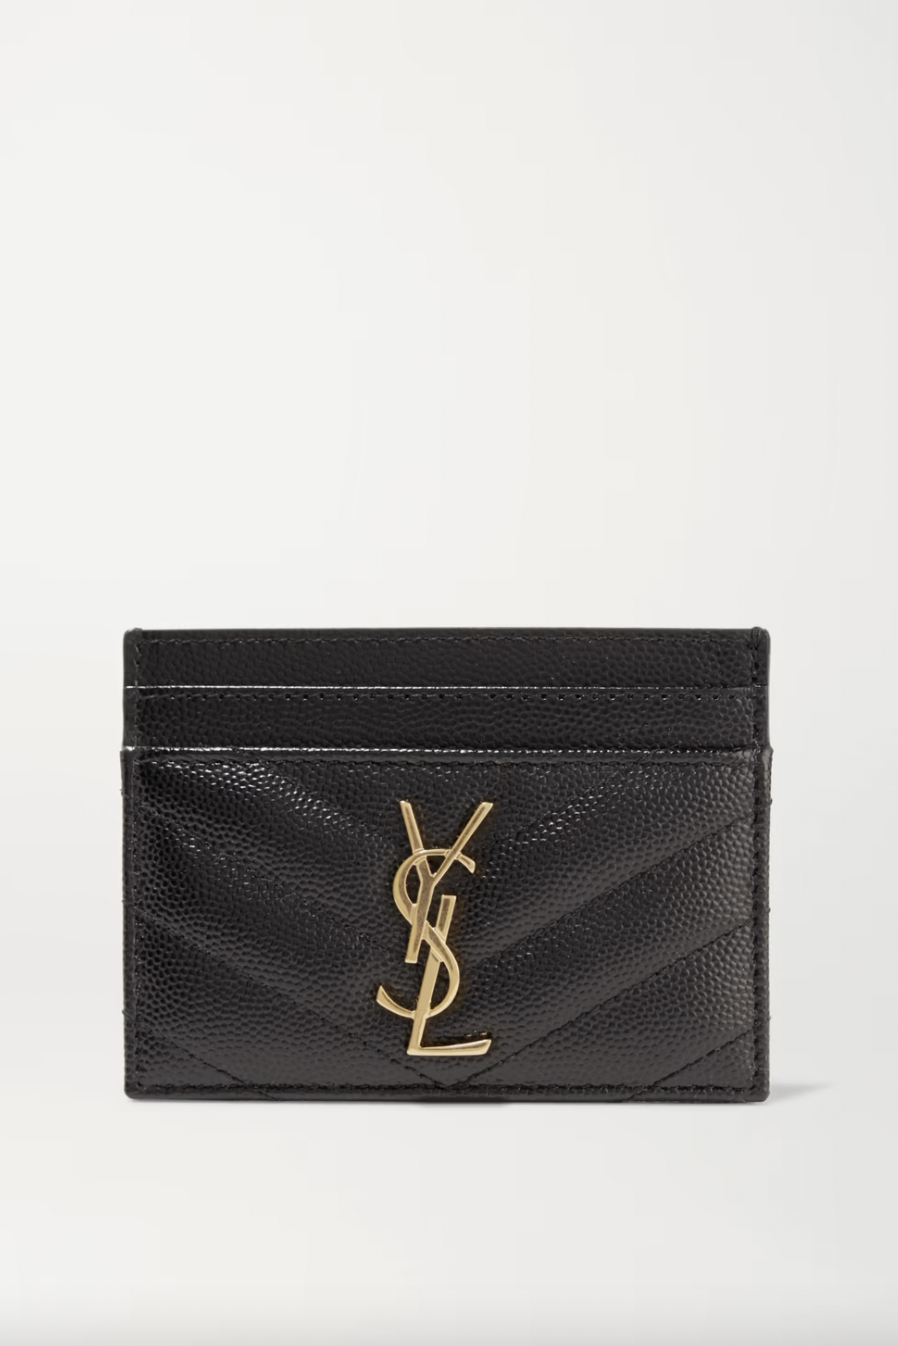 Luxuries They'll Love: 9 Christmas Gift Ideas From Louis Vuitton